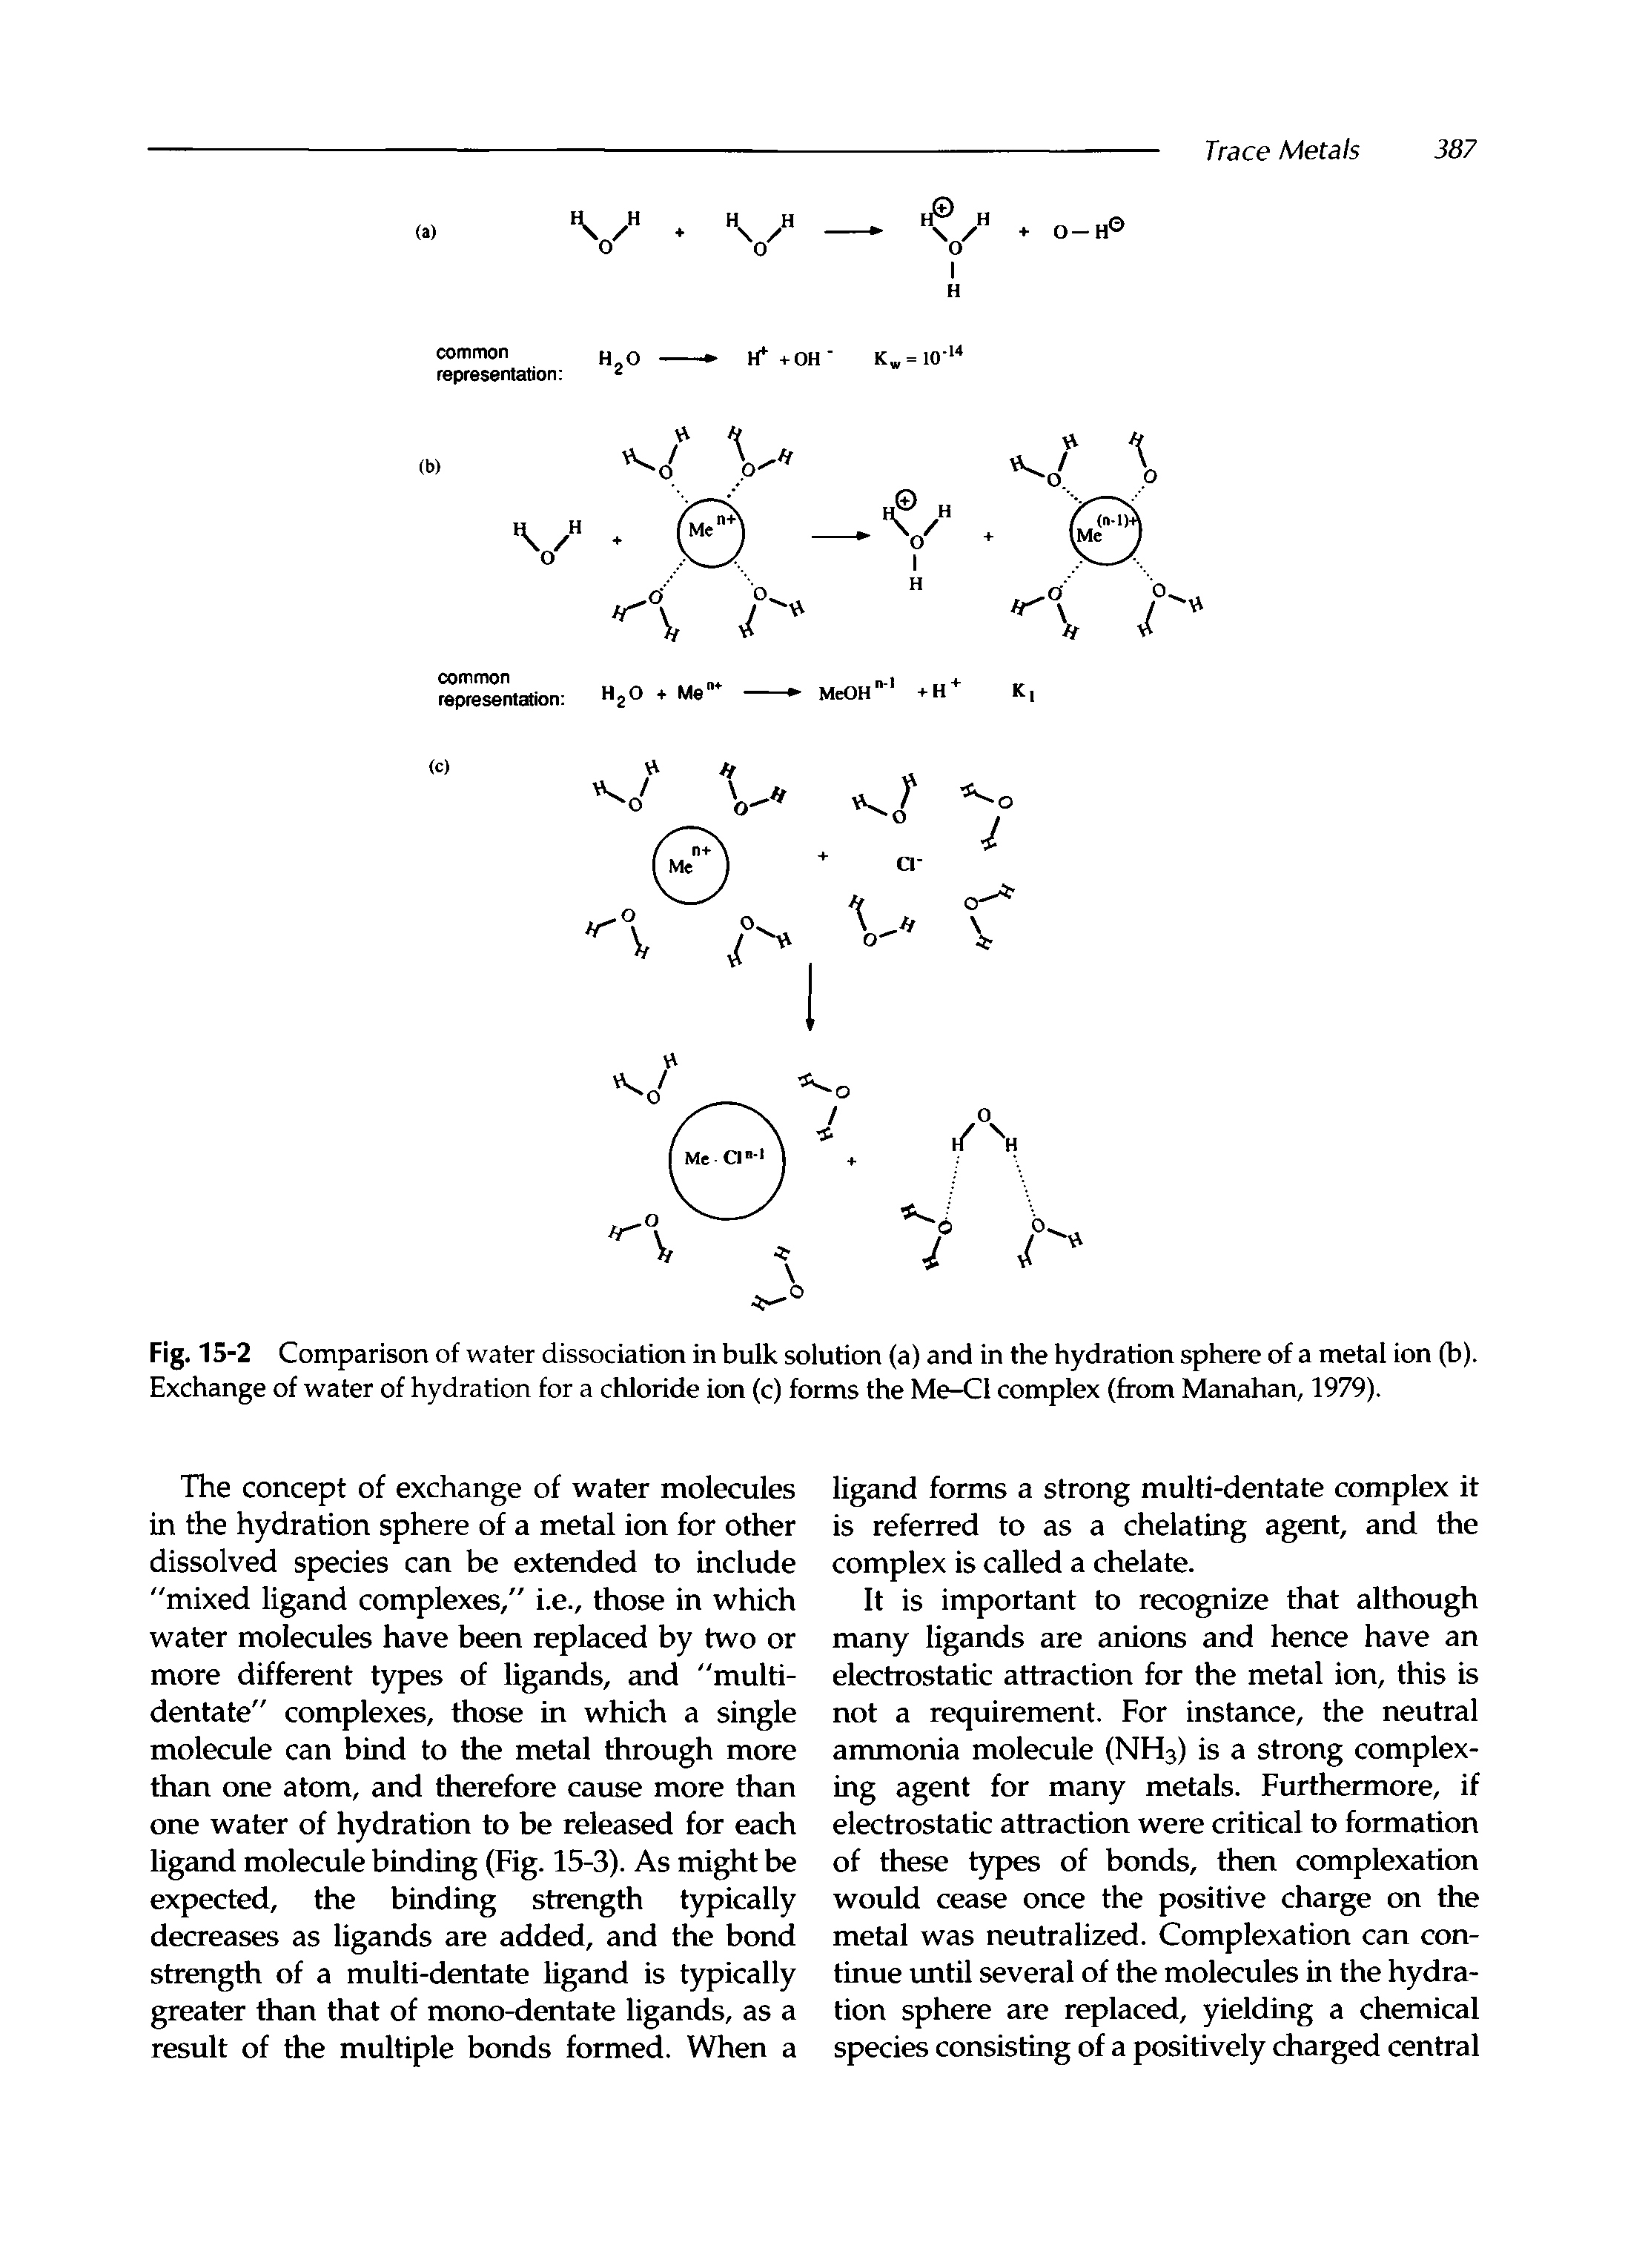 Fig. 15-2 Comparison of water dissociation in bulk solution (a) and in the hydration sphere of a metal ion (b). Exchange of water of hydration for a chloride ion (c) forms the Me-Cl complex (from Manahan, 1979).